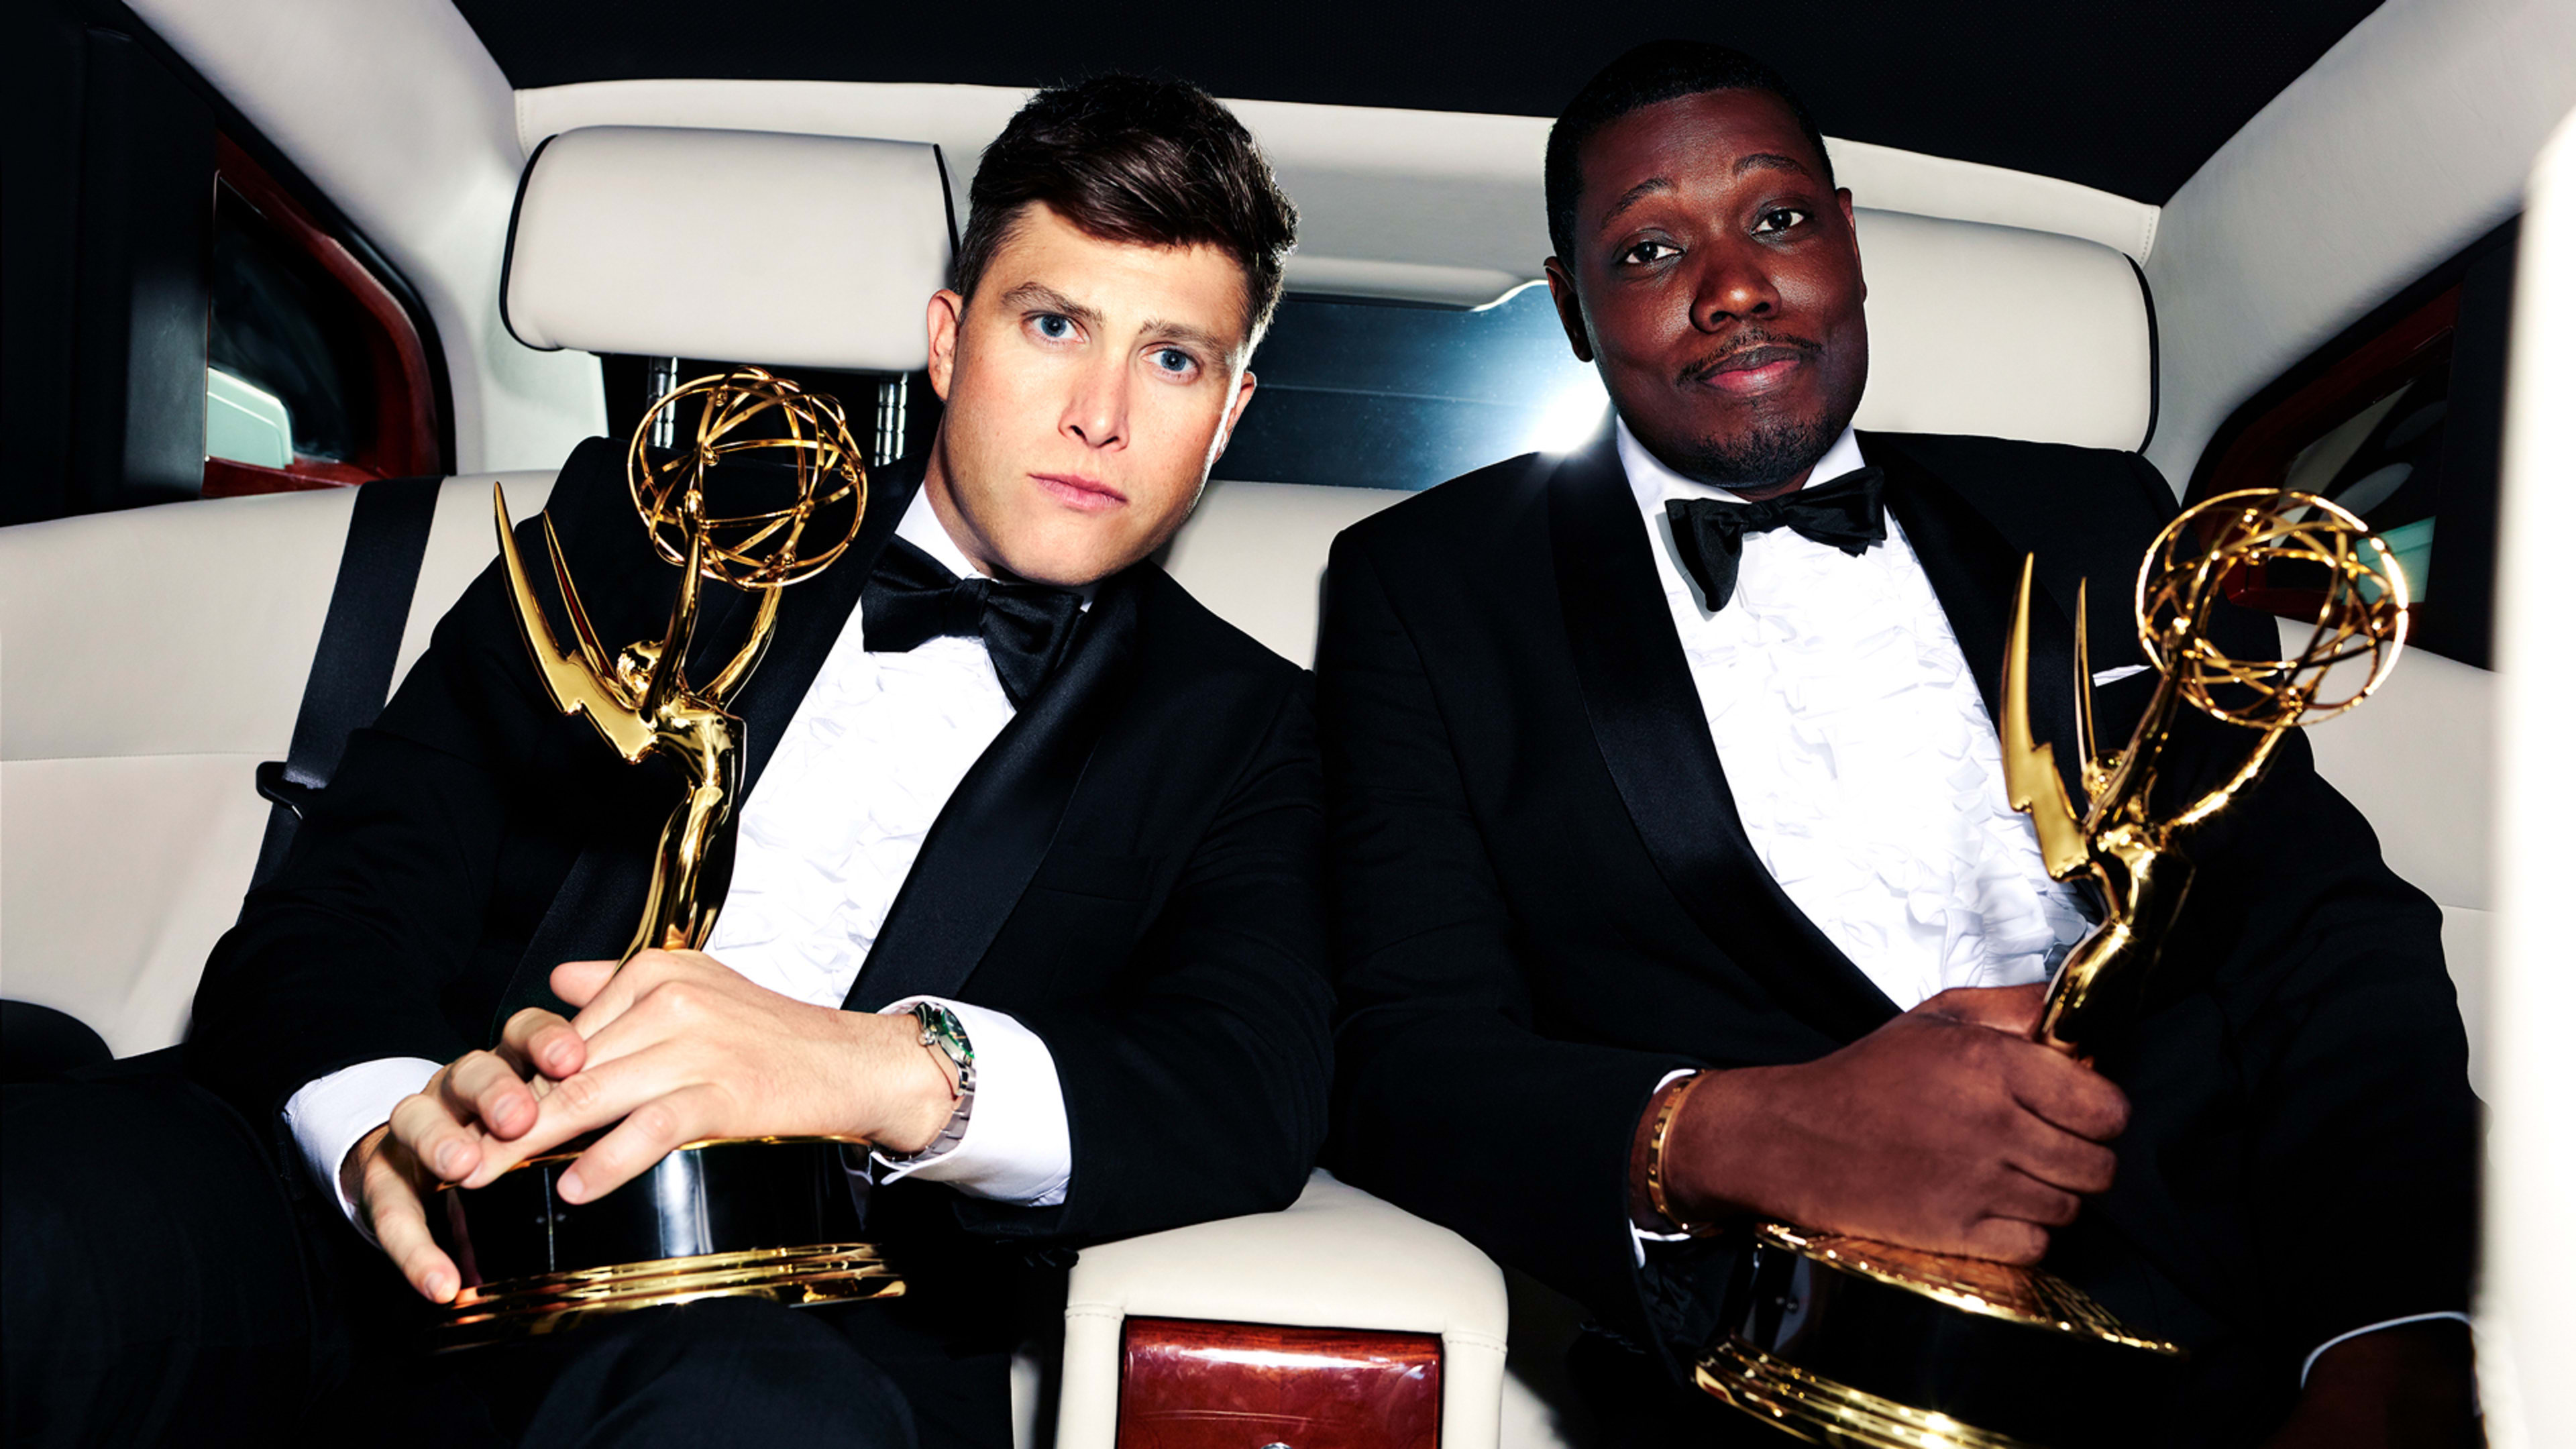 Michael Che and Colin Jost’s best jokes from their Emmy Awards monologue